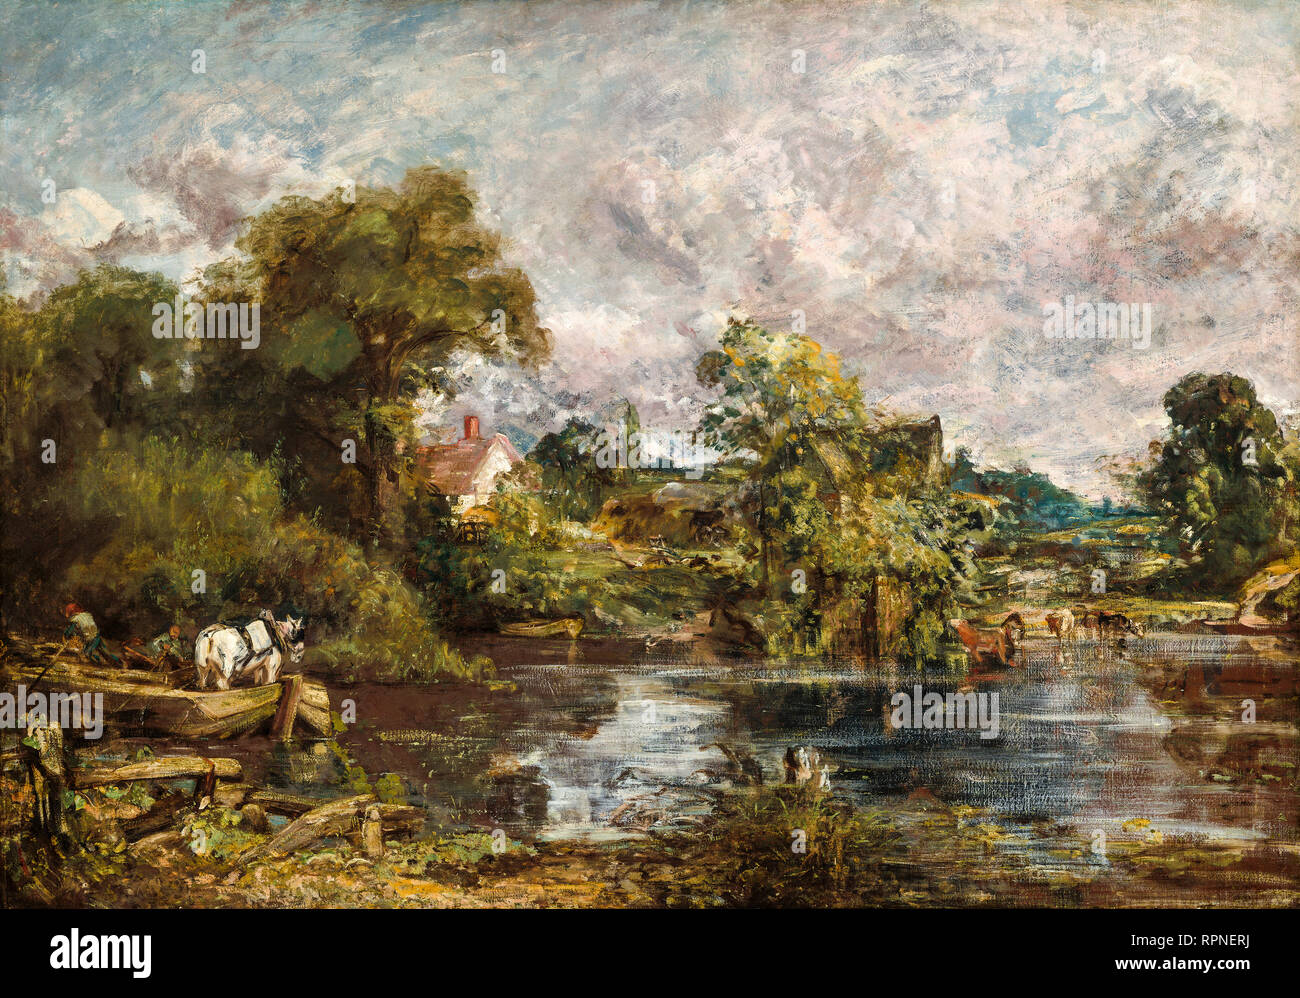 John Constable, The White Horse, 1818-1819, landscape painting Stock Photo